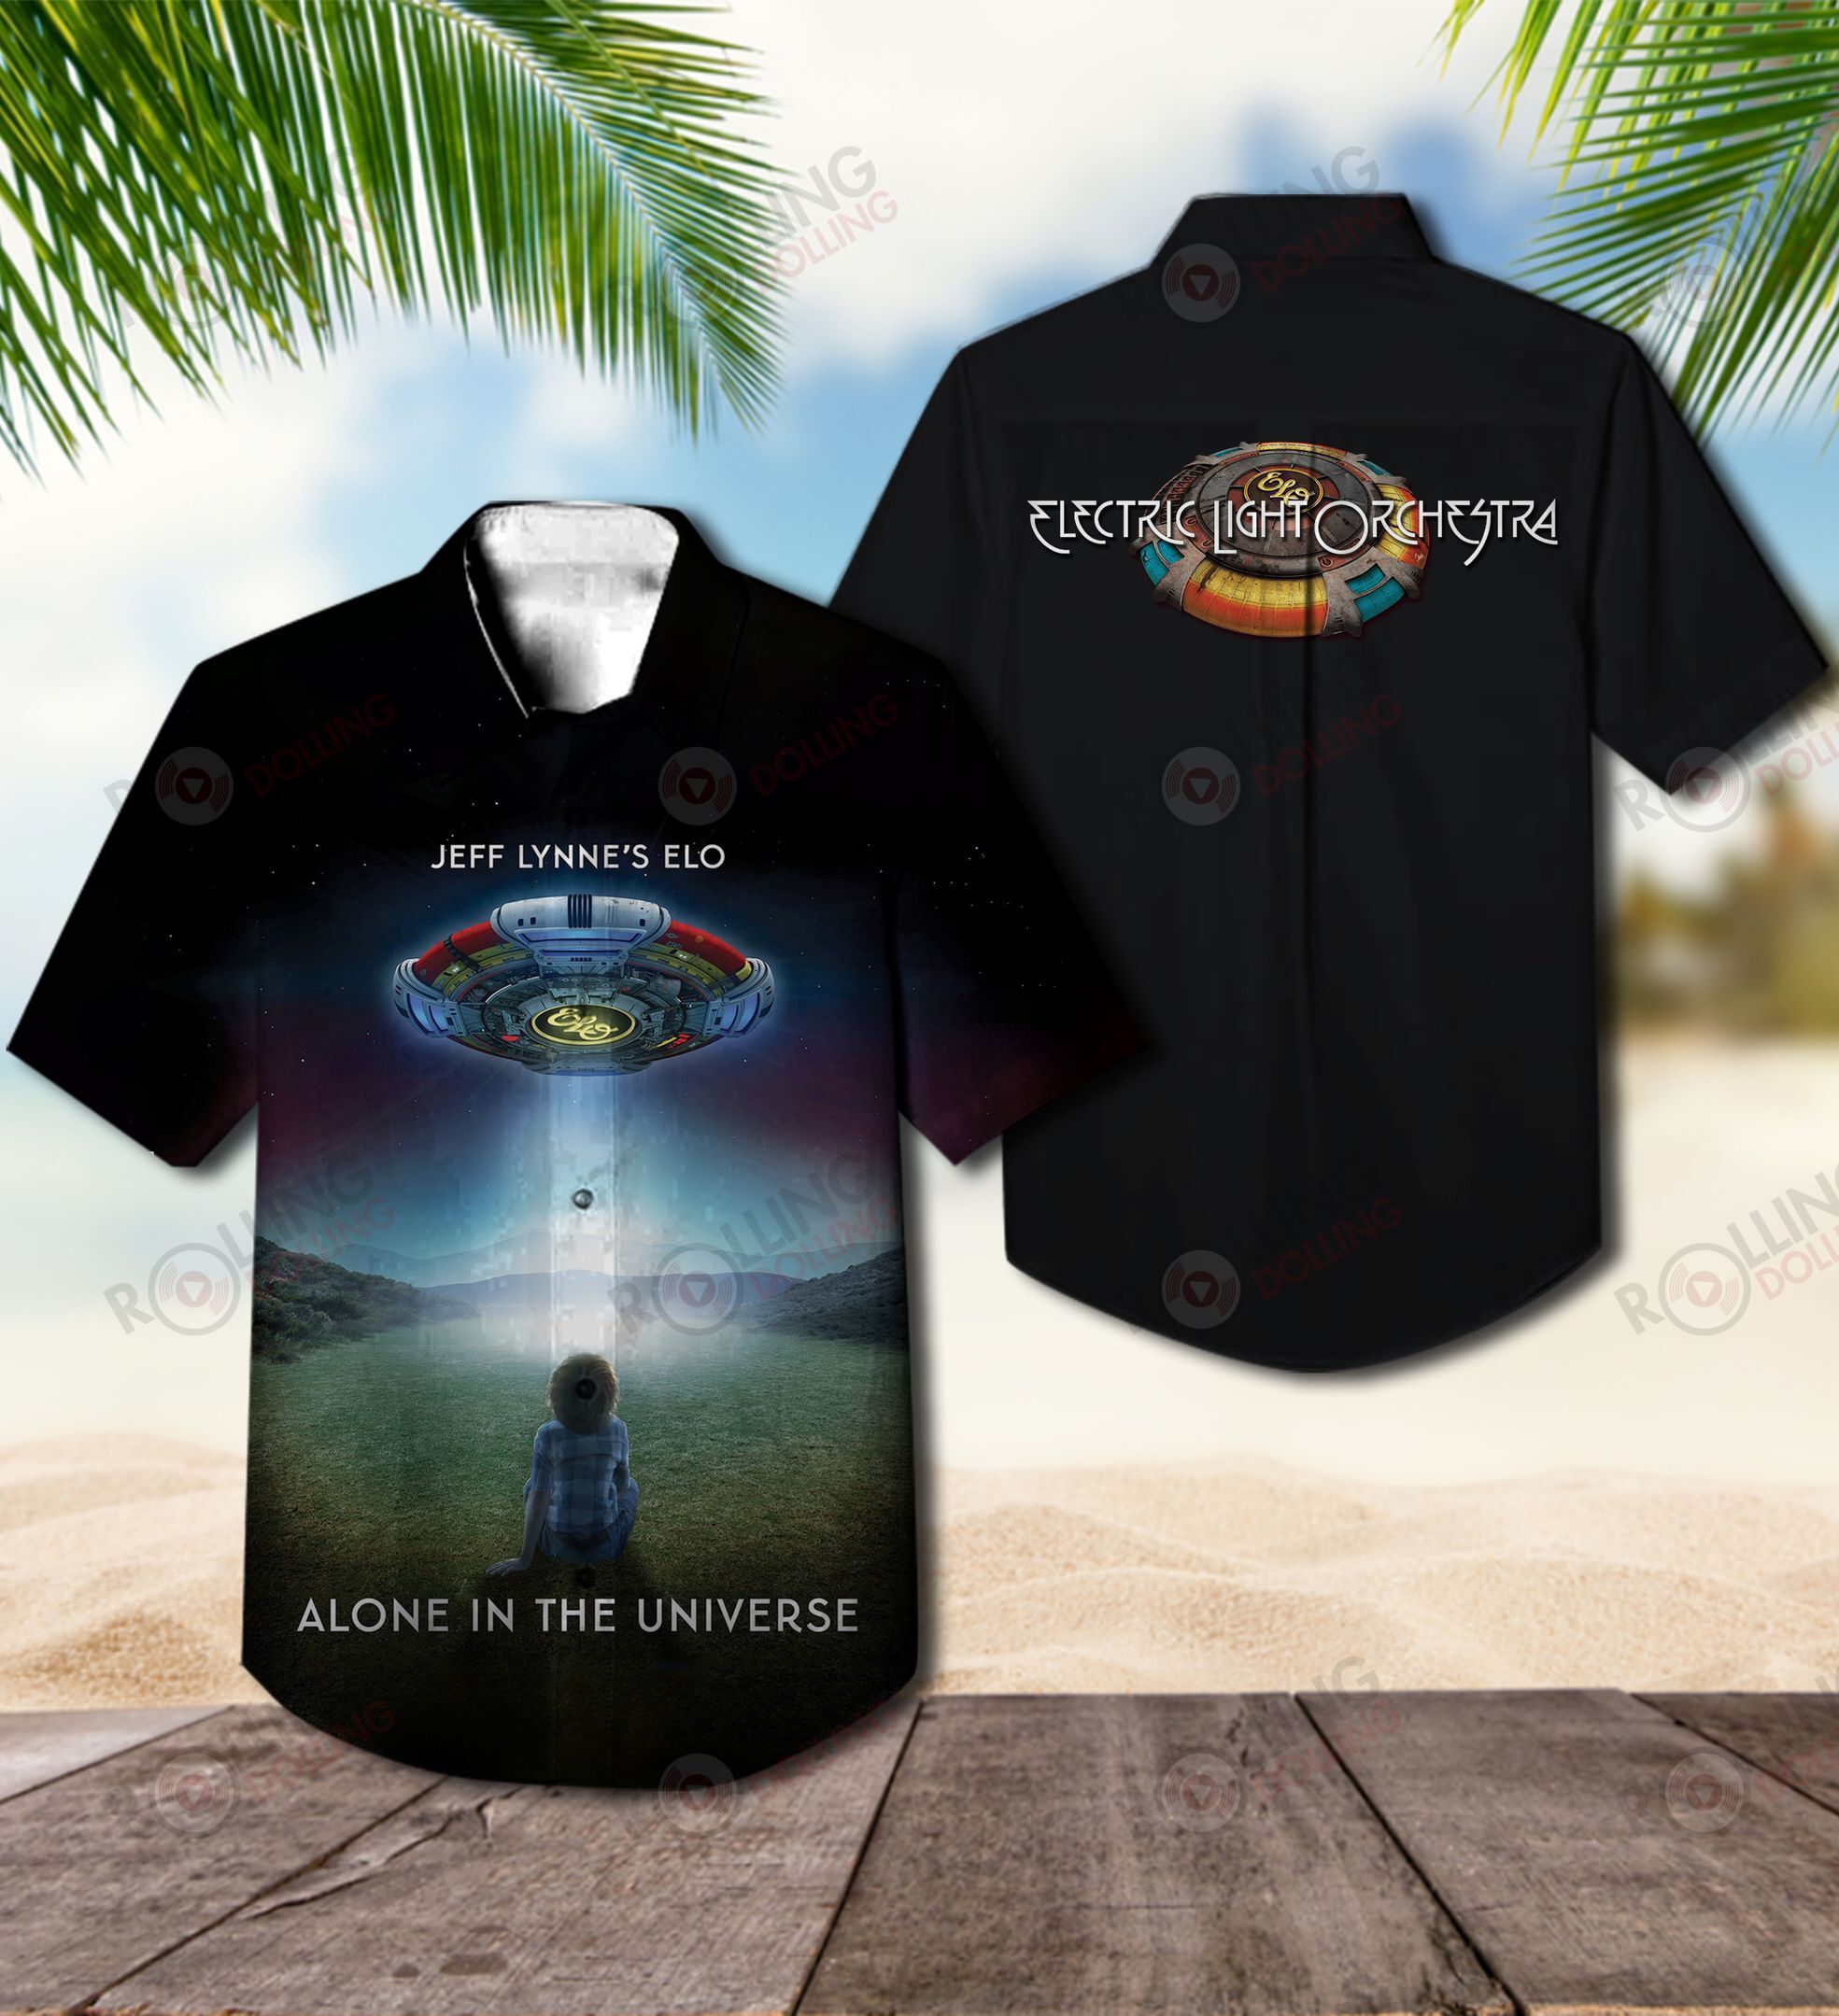 This would make a great gift for any fan who loves Hawaiian Shirt as well as Rock band 129